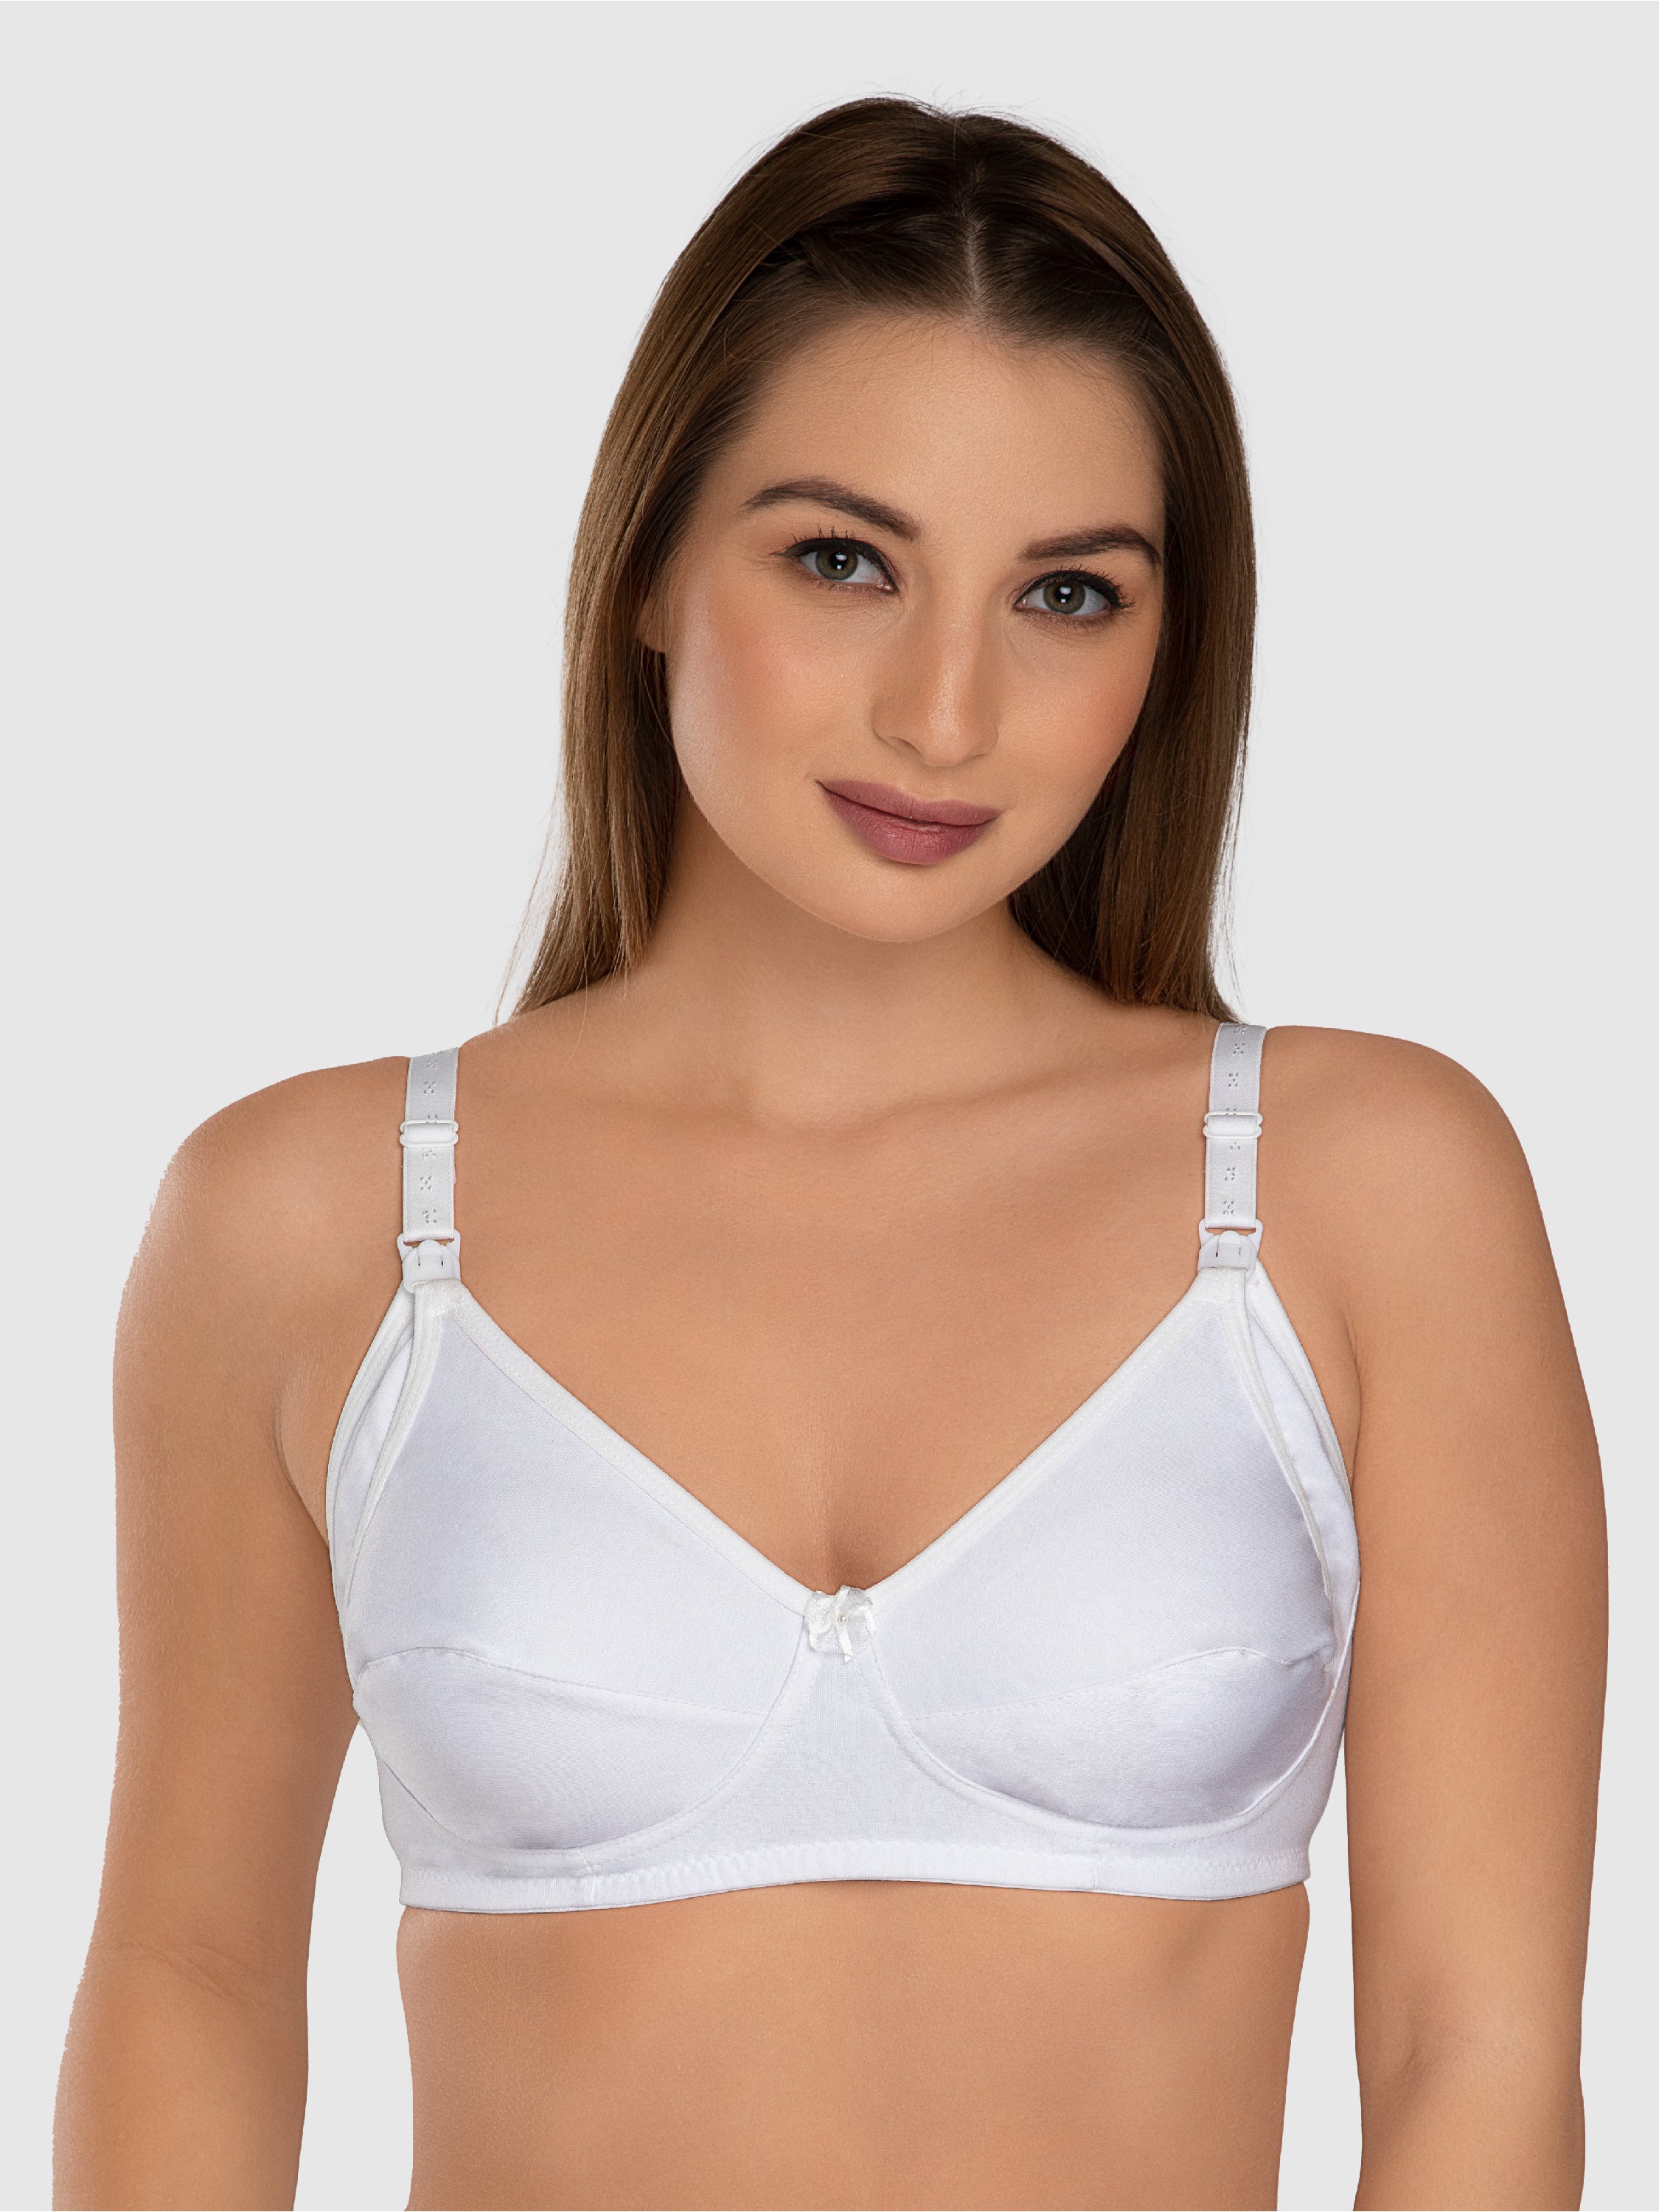 Daisy Dee White Non Padded Non Wired Full Coverage Maternity Bra -DAINTY-White